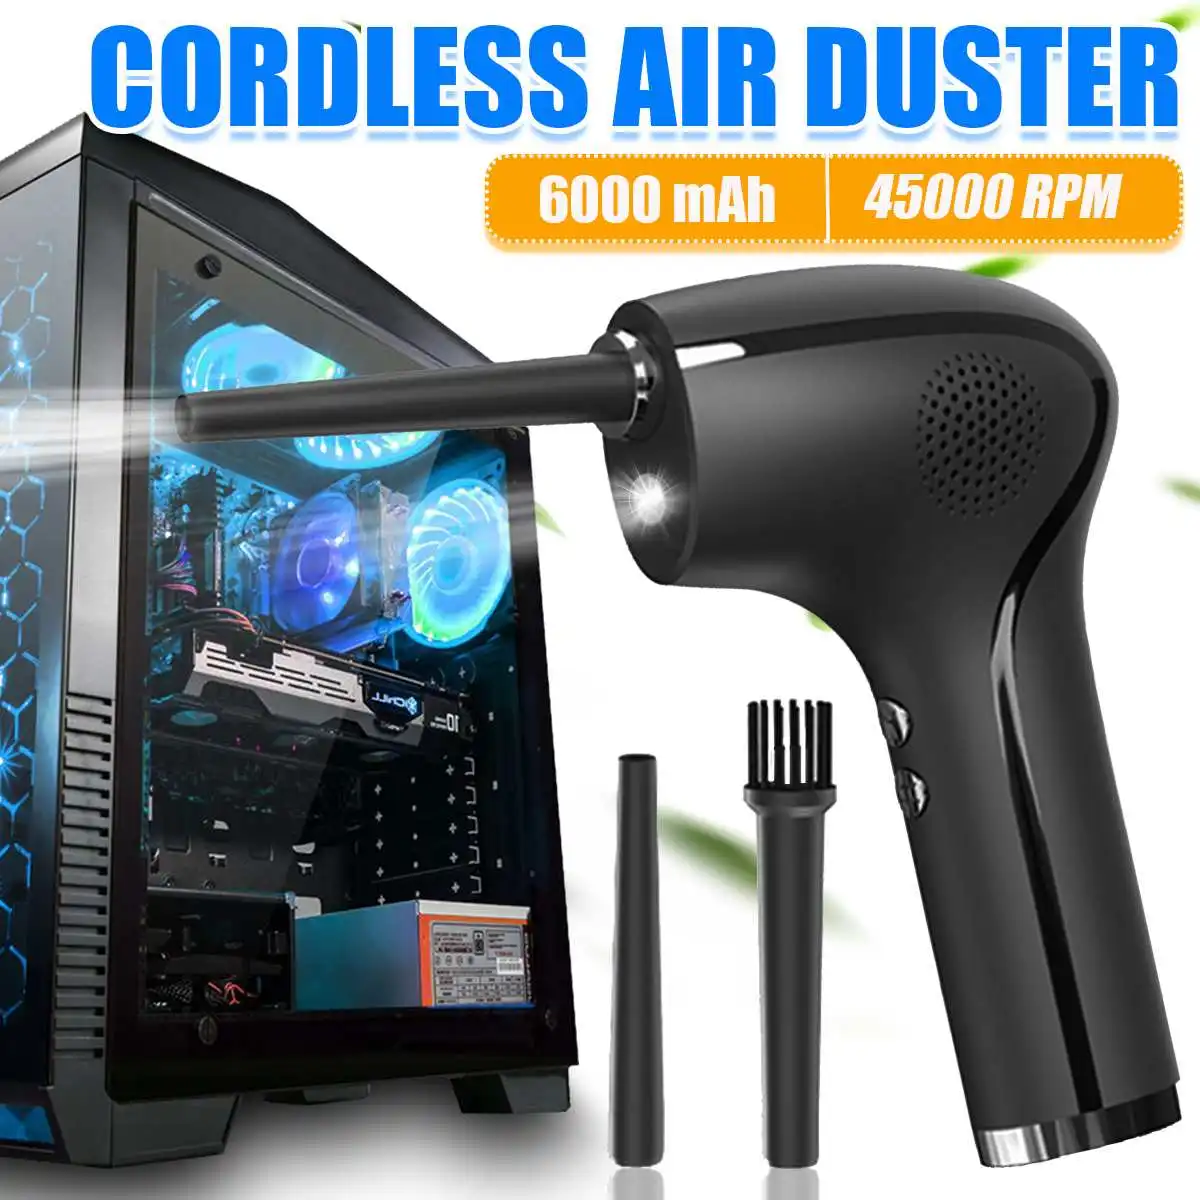 NEW 45000 Pa Cordless Air Duster Compressed Air Blower Cleaning Tool W/Light For Computer Laptop Keyboard Electronics Cleaning